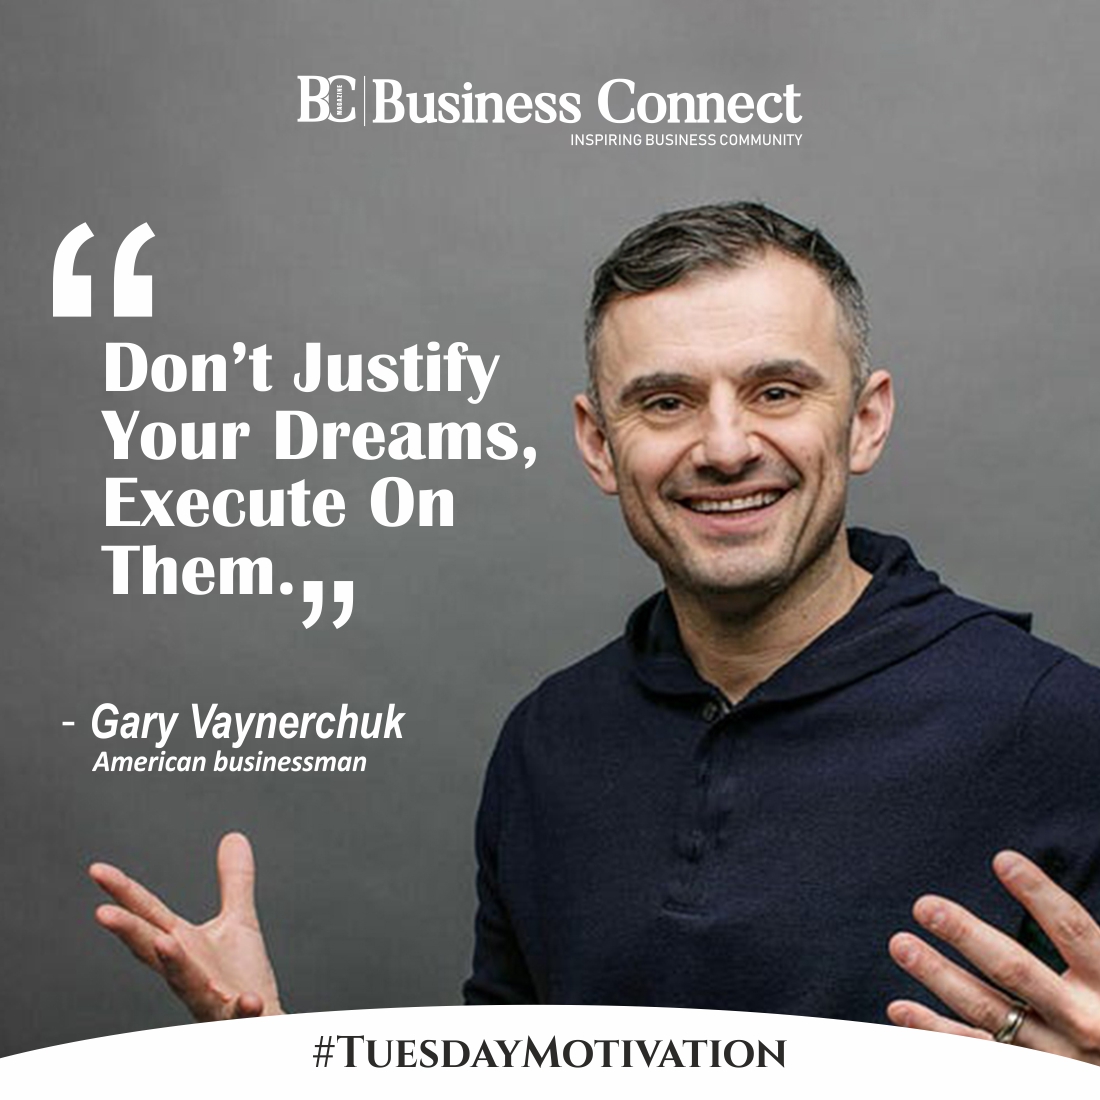 “Don’t justify your dreams, execute on them.” -Gary Vaynerchuk Must Visit our website: businessconnectindia.in #tuesdaymotivation #tuesday #tuesdayvibes #tuesdaythoughts #tuesdaymood #motivation #tuesdaymorning #motivationalquotes